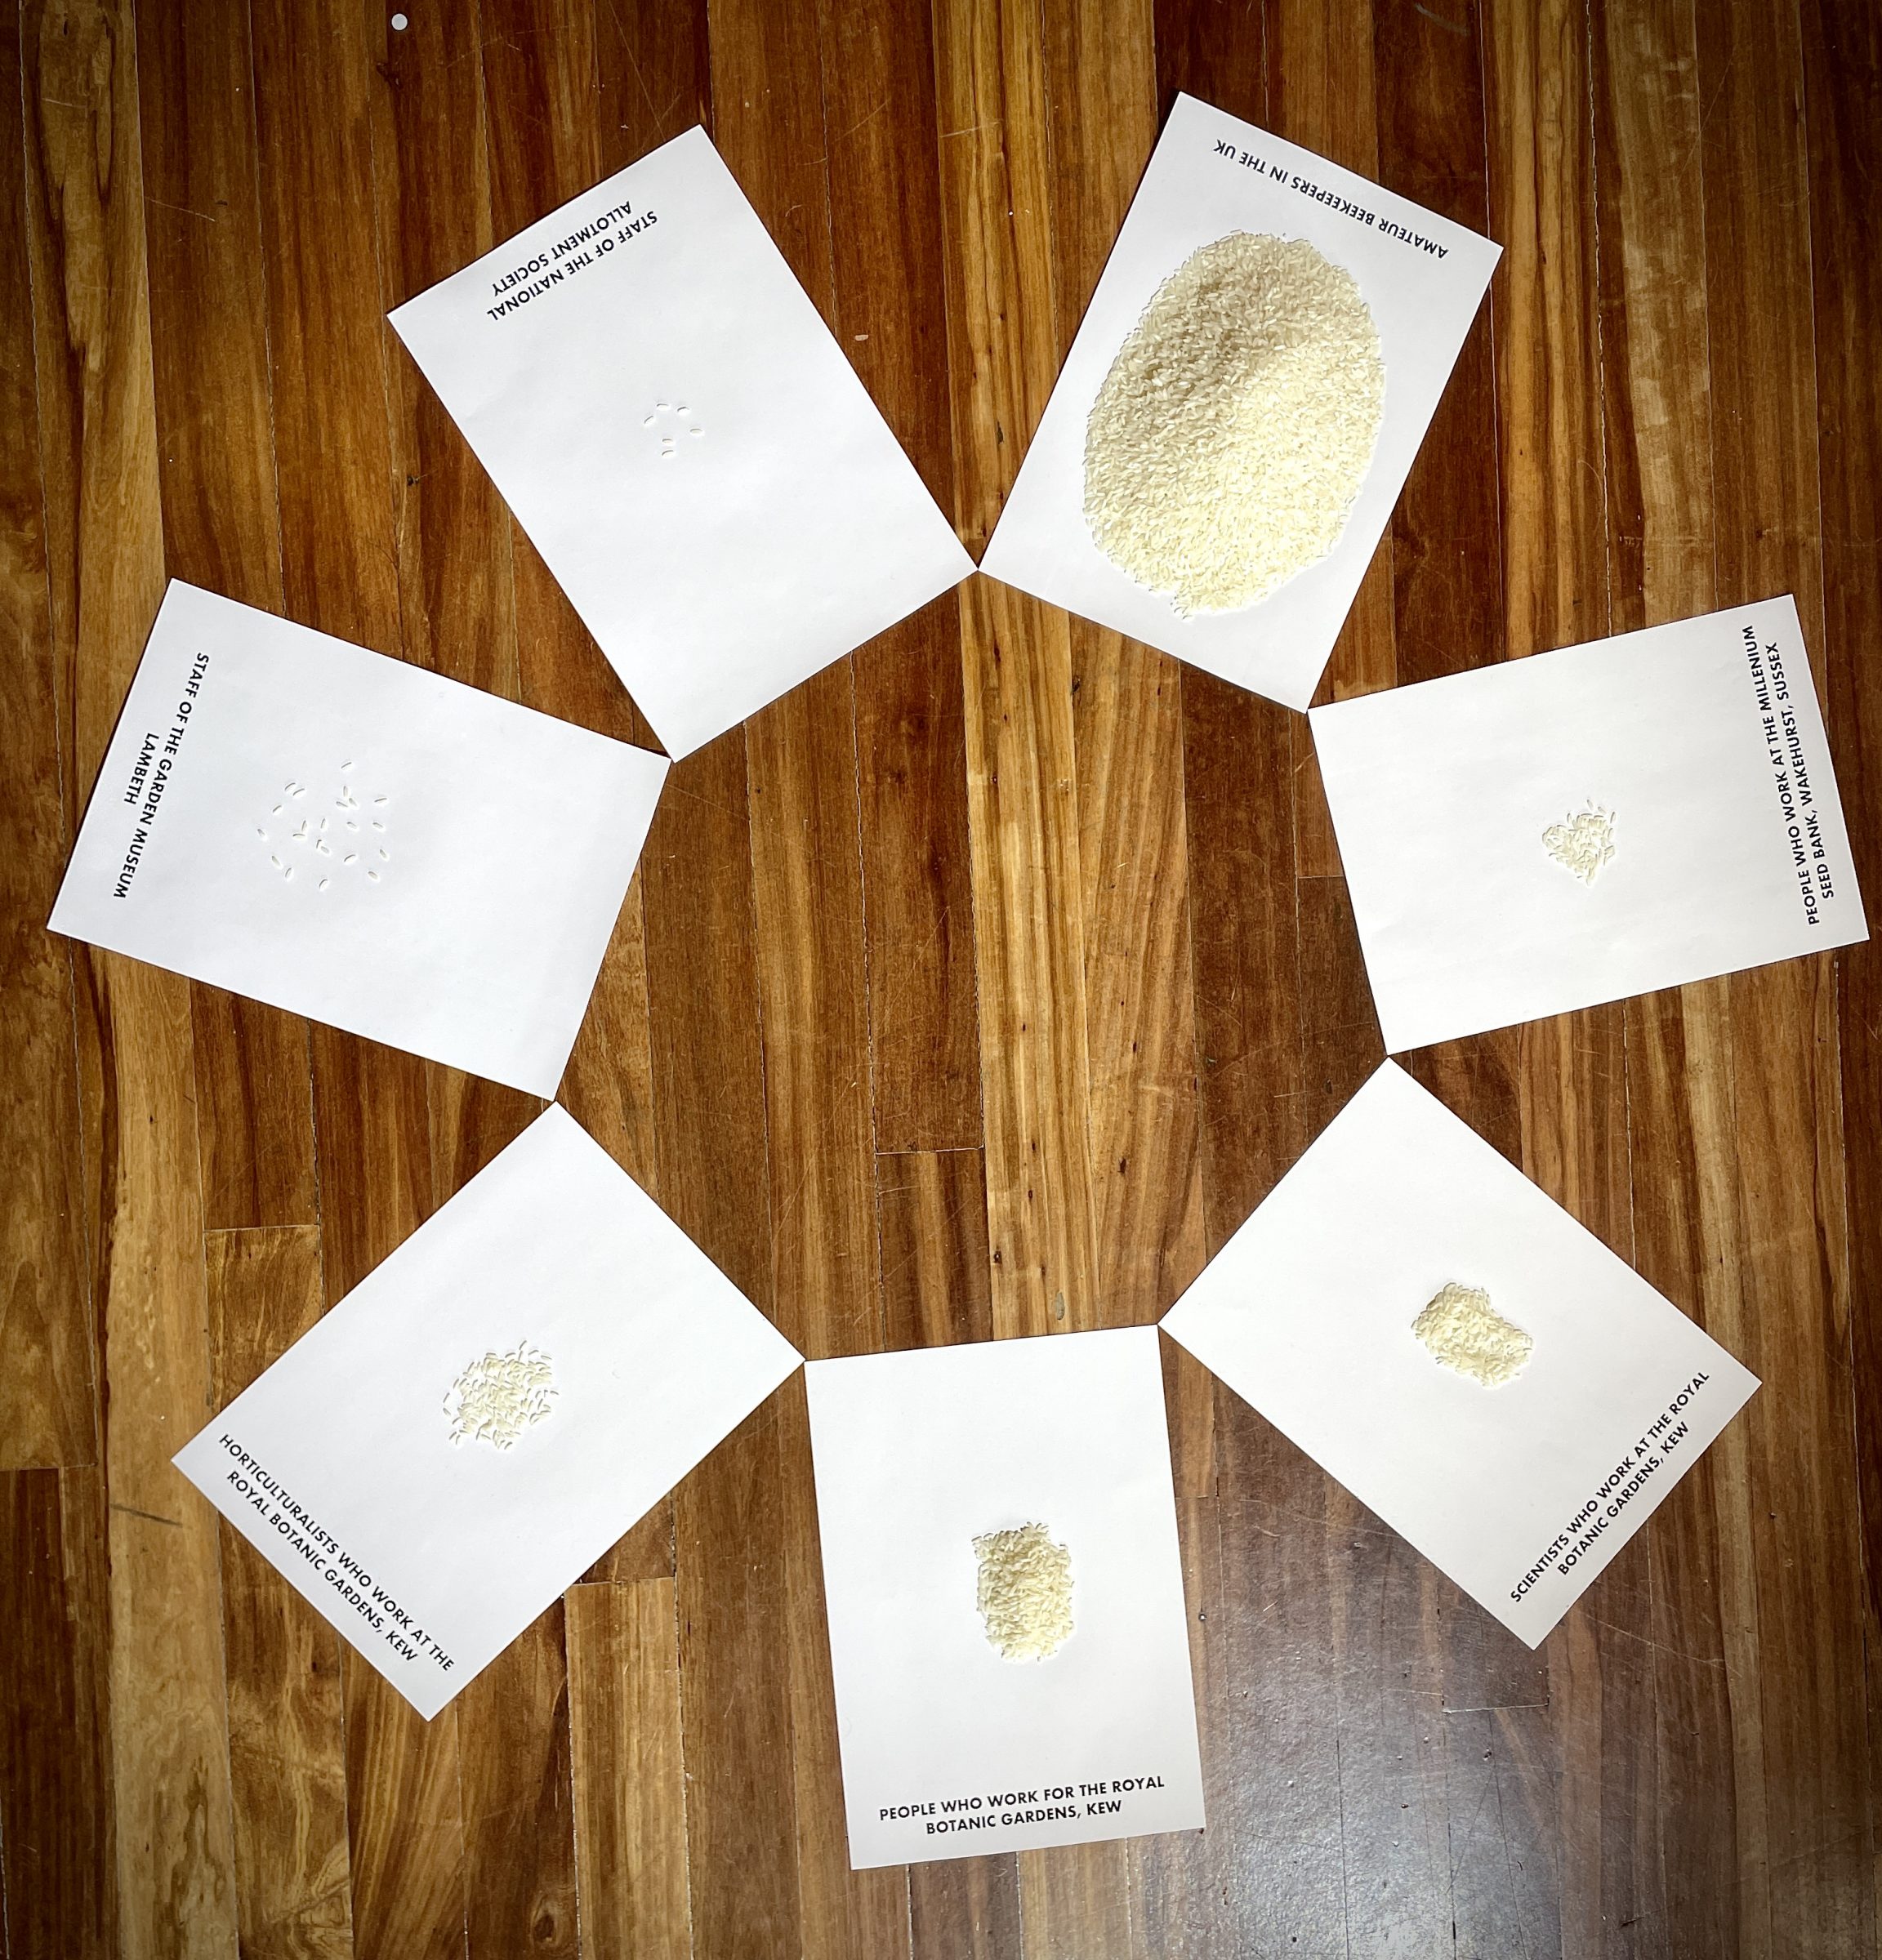 A photograph taken form above of 7 sheets of paper arranged in a circle and holding small piles of rice, including people who work at Kew Gardens, Staff of the National Allotment Association and amateur beekeepers.